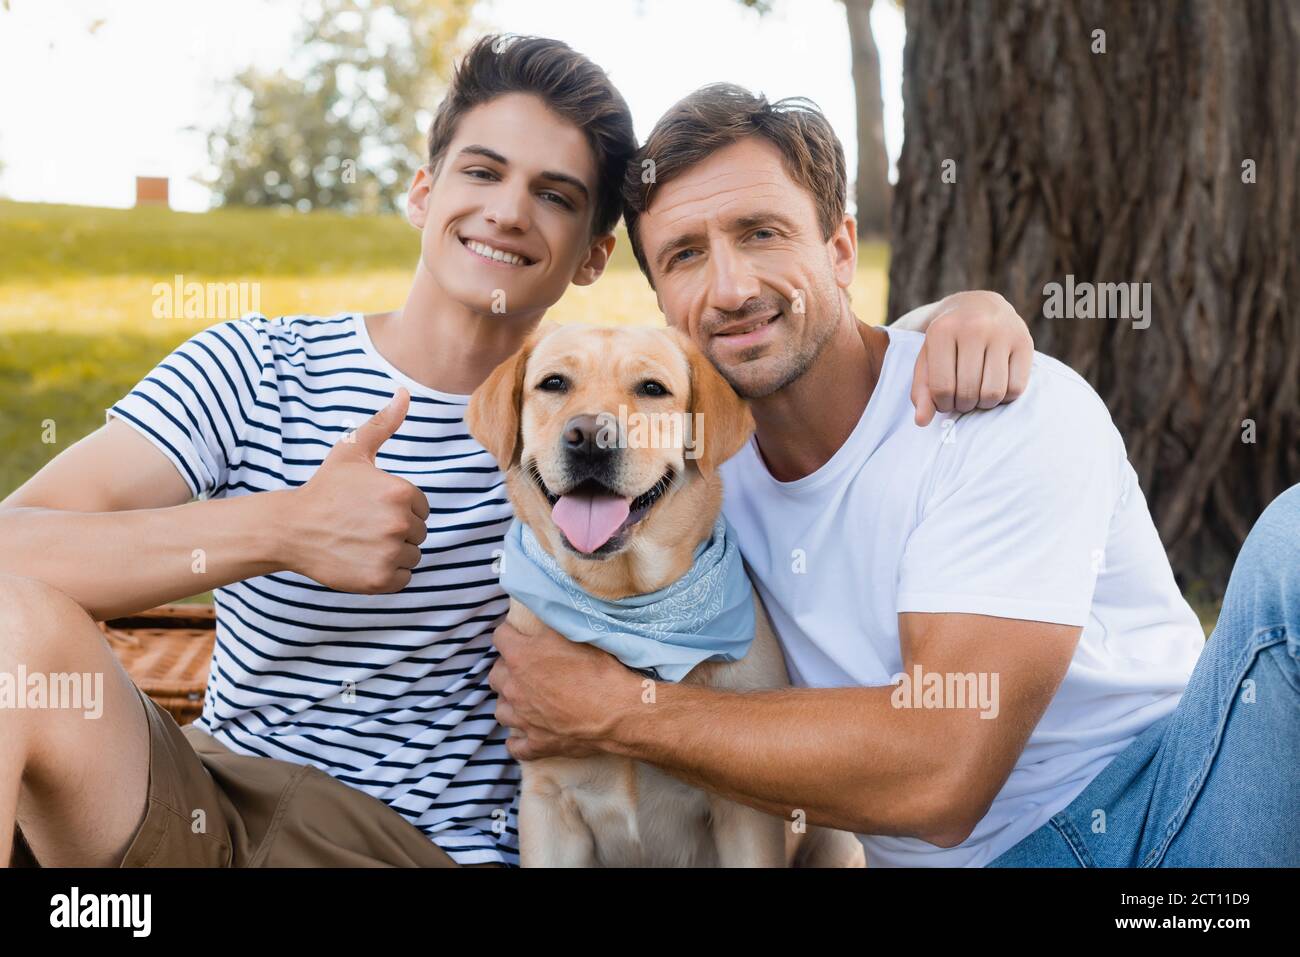 teenager son showing thumb up and hugging father near golden retriever Stock Photo